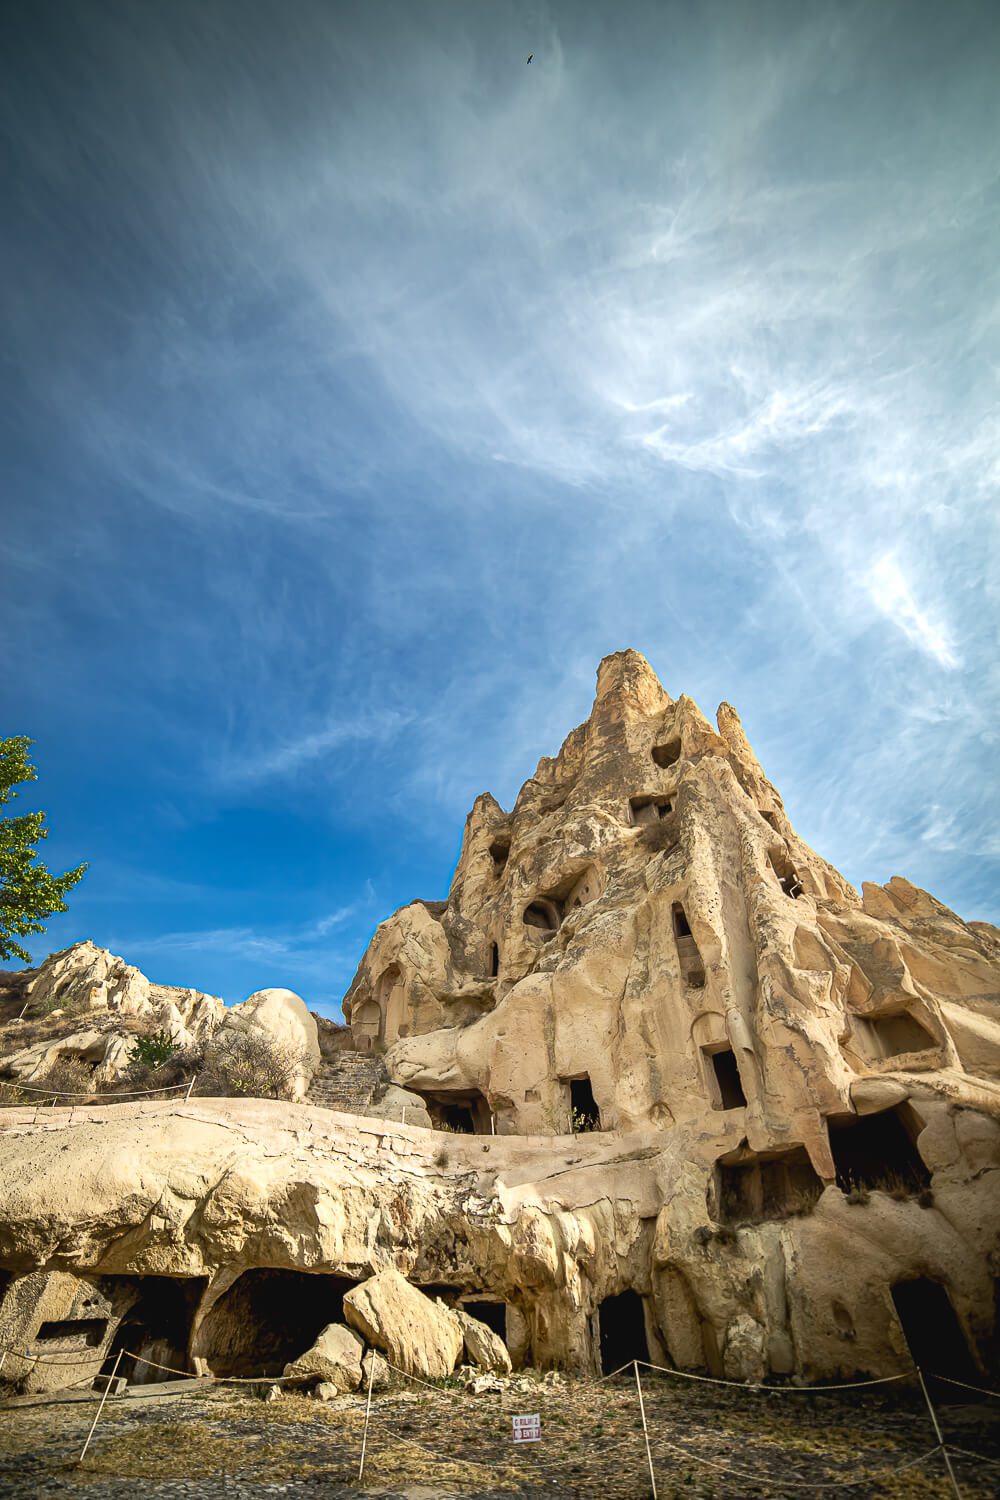 Monasteries carved into the rock in Goreme Turkey 